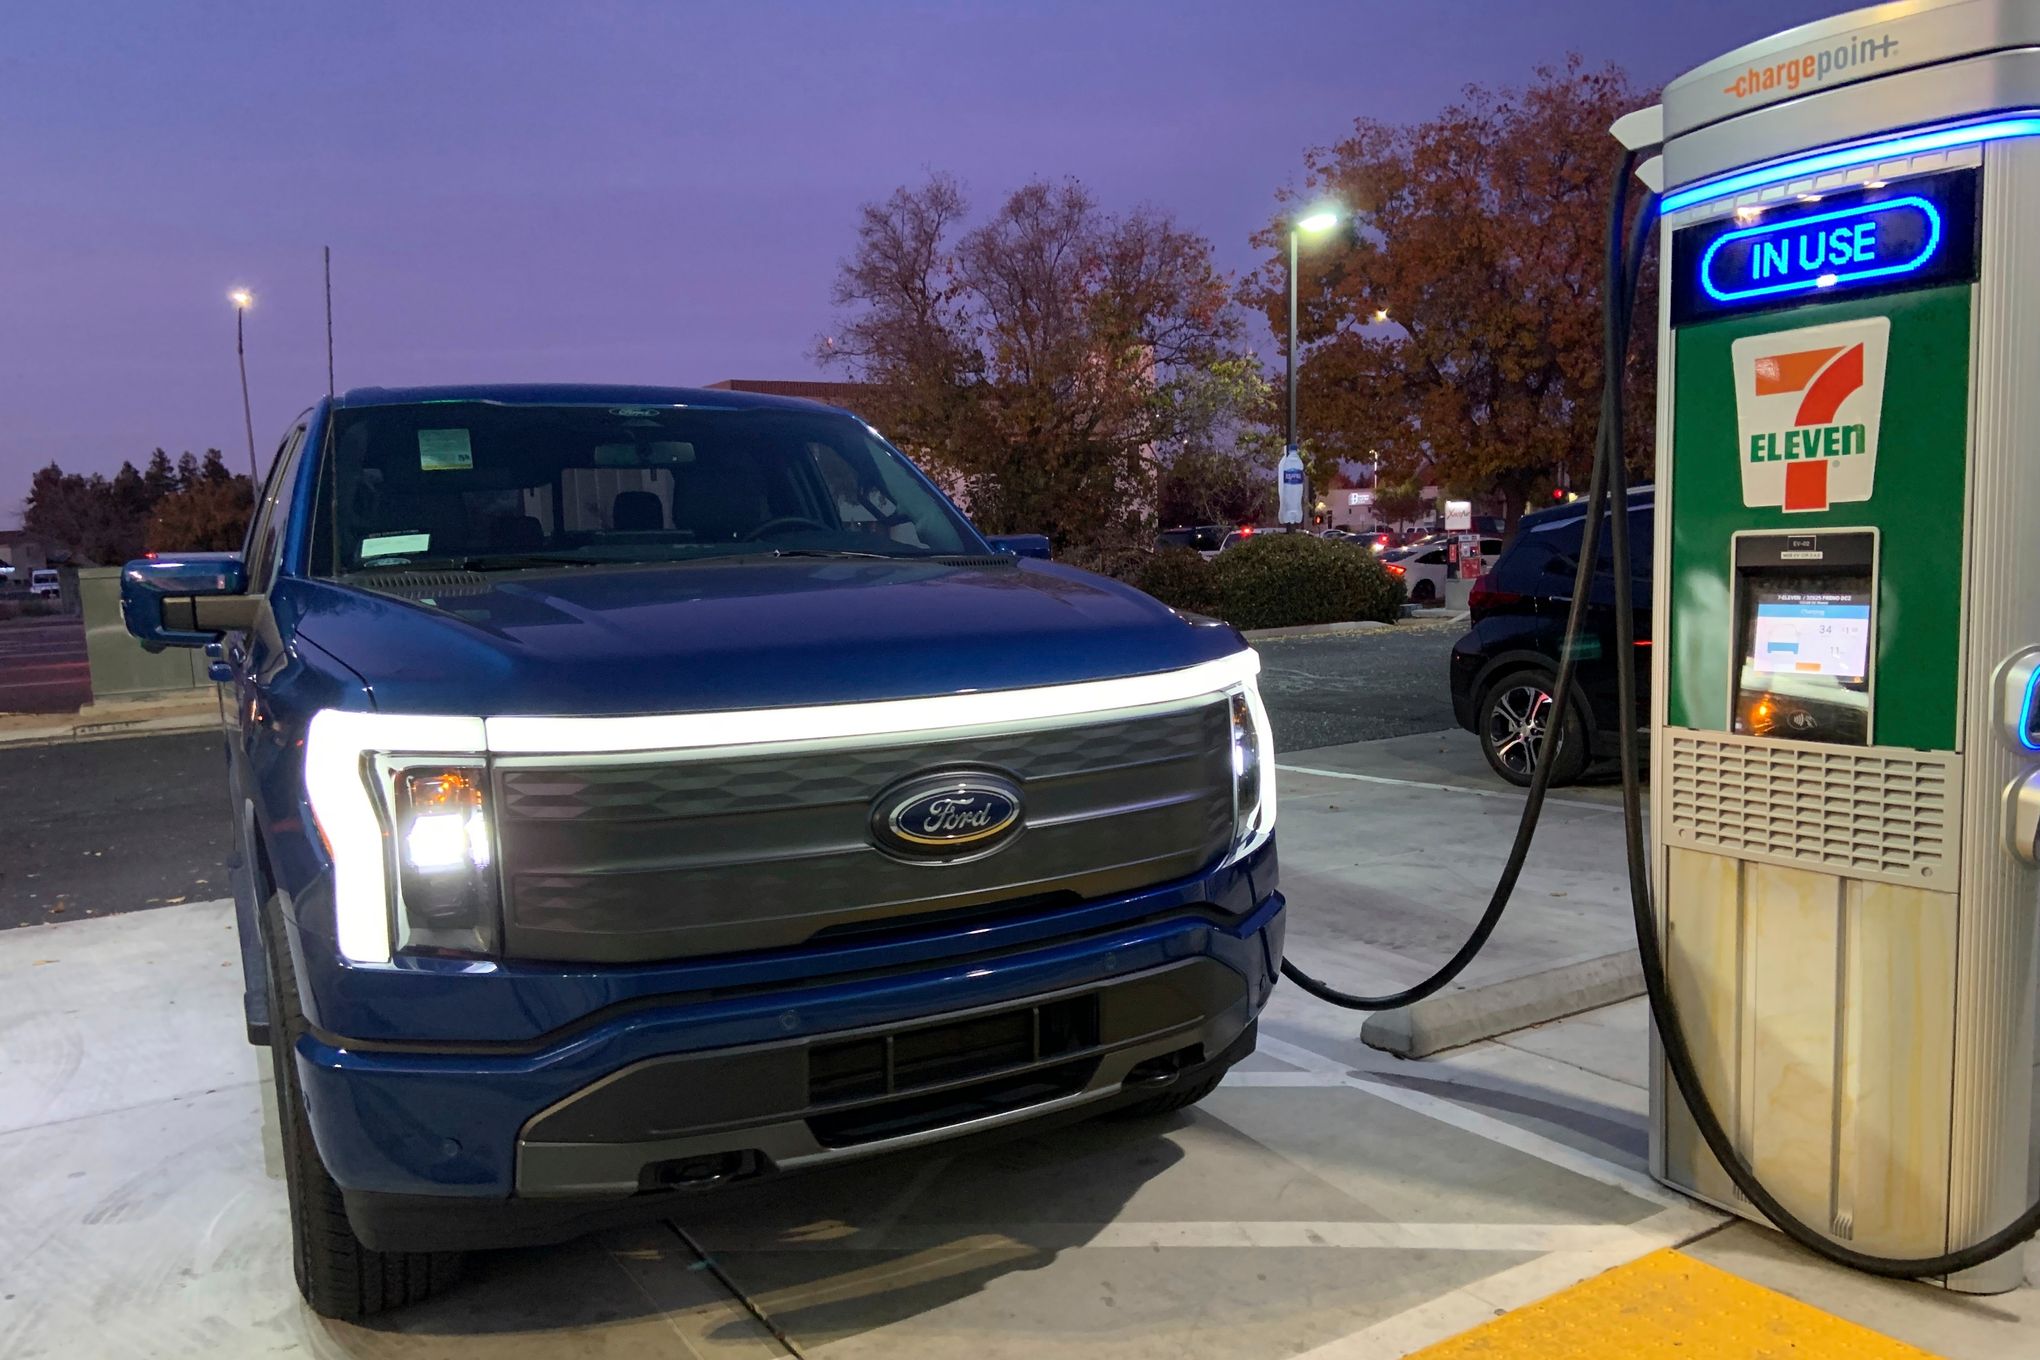 New to electric vehicles? We answer the questions you're afraid to ask